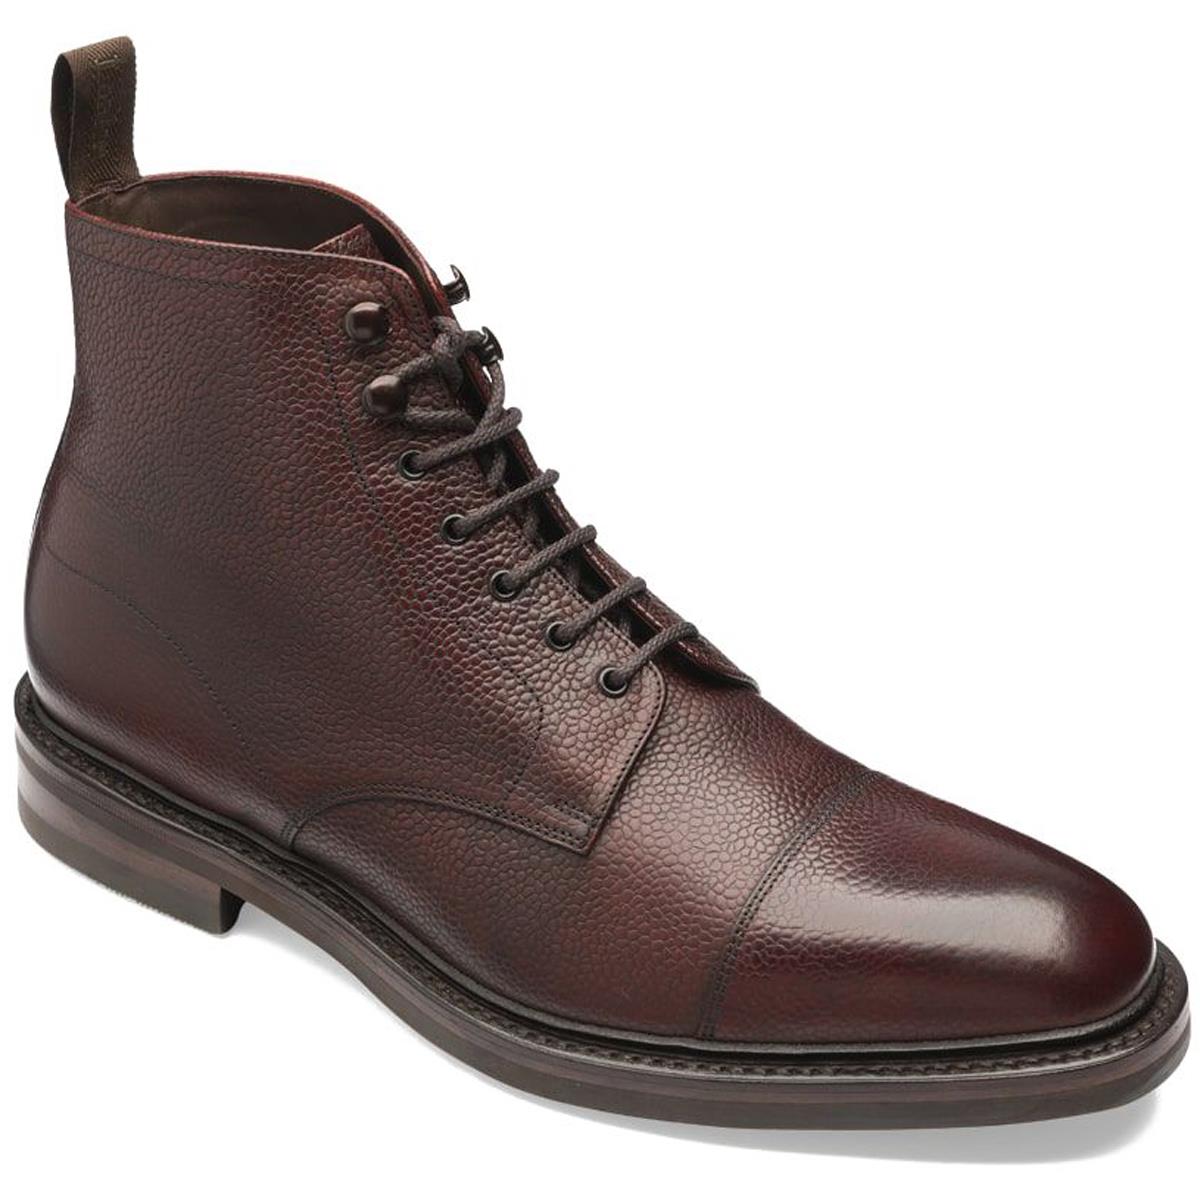 Do the Loake Mens Roehampton Boots come in a size F fitting?